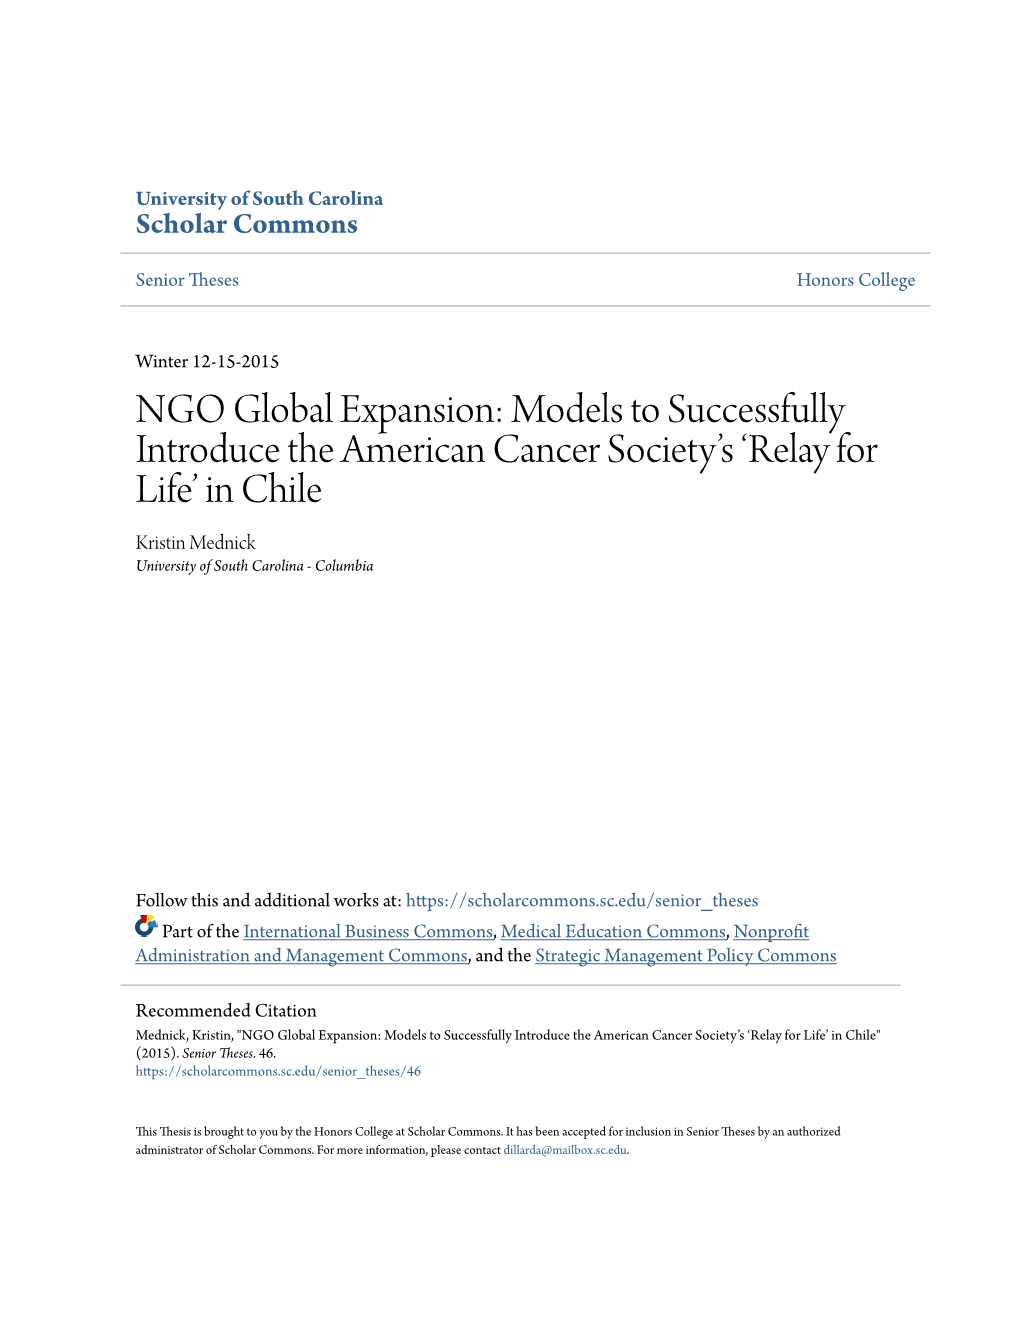 NGO Global Expansion: Models to Successfully Introduce the American Cancer Society’S ‘Relay for Life’ in Chile Kristin Mednick University of South Carolina - Columbia